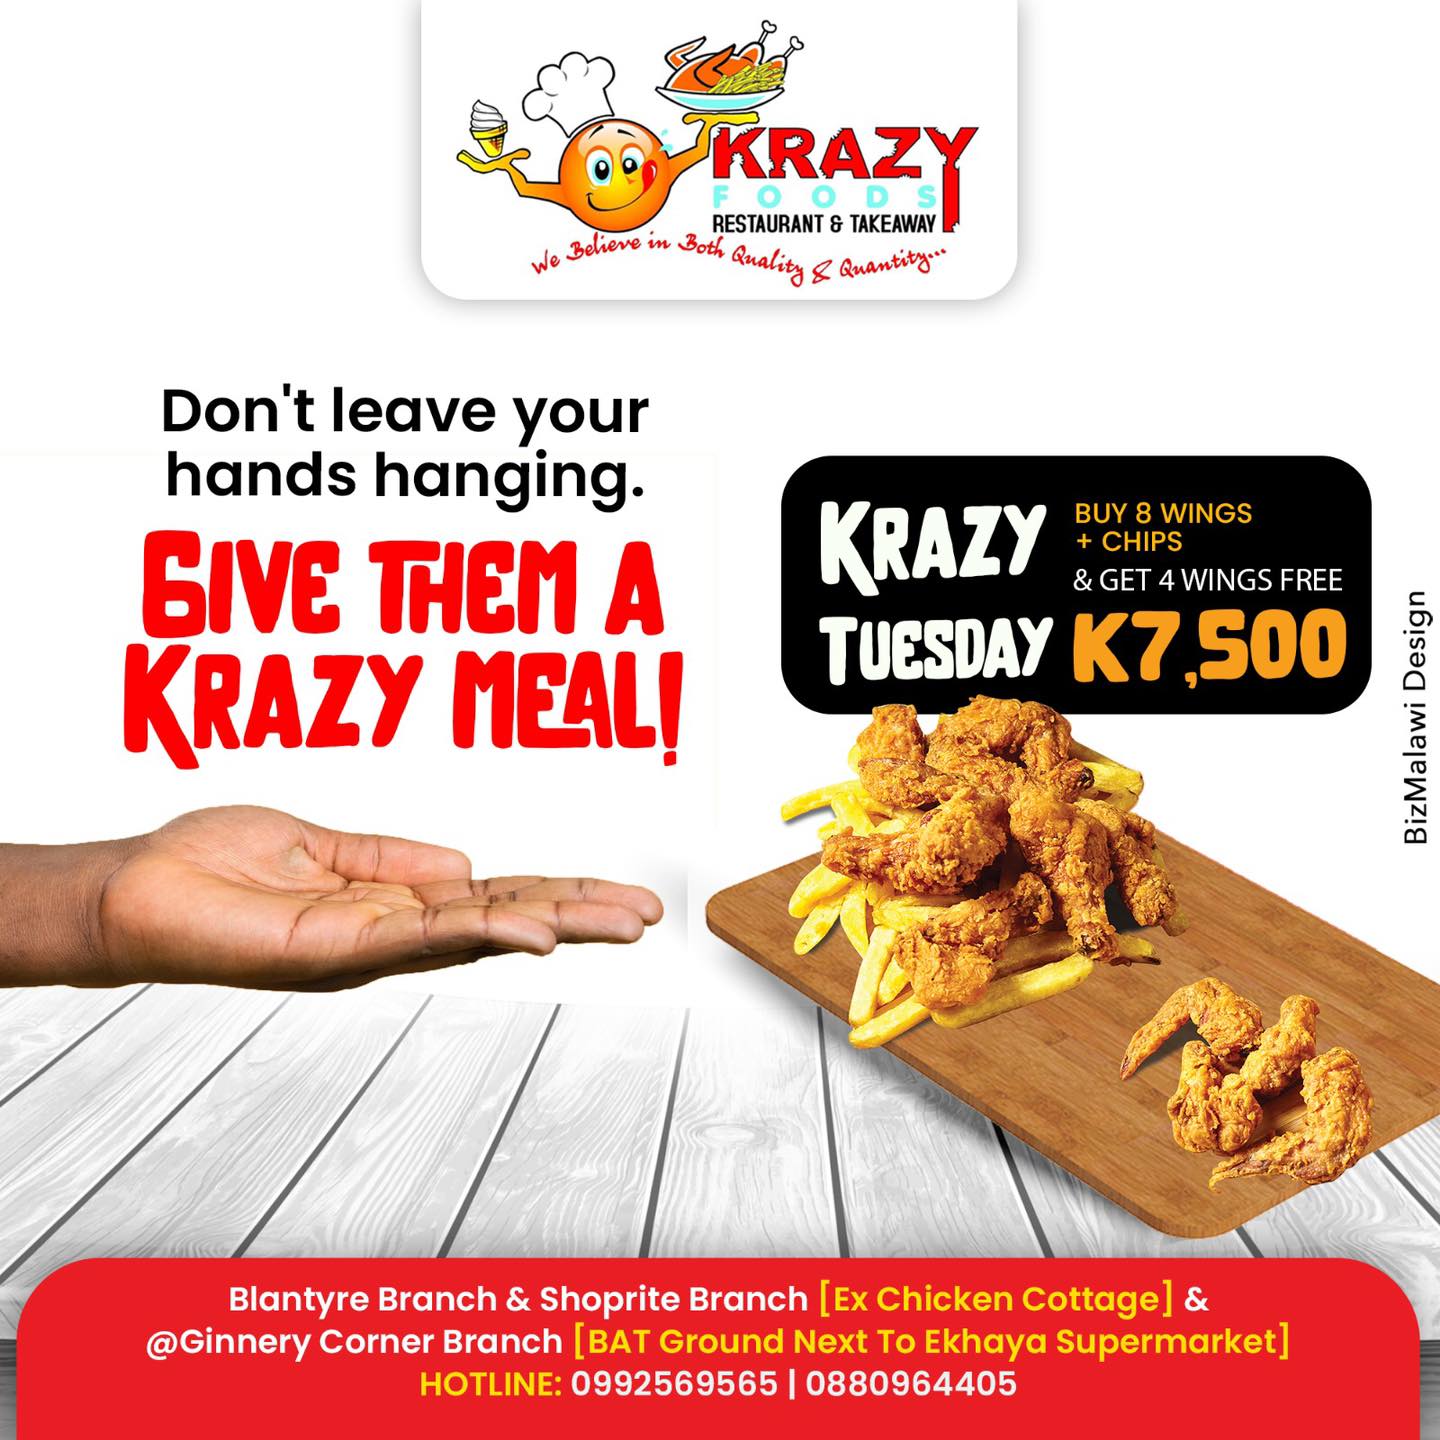 It's Krazy Tuesday! Treat yourself to a ...